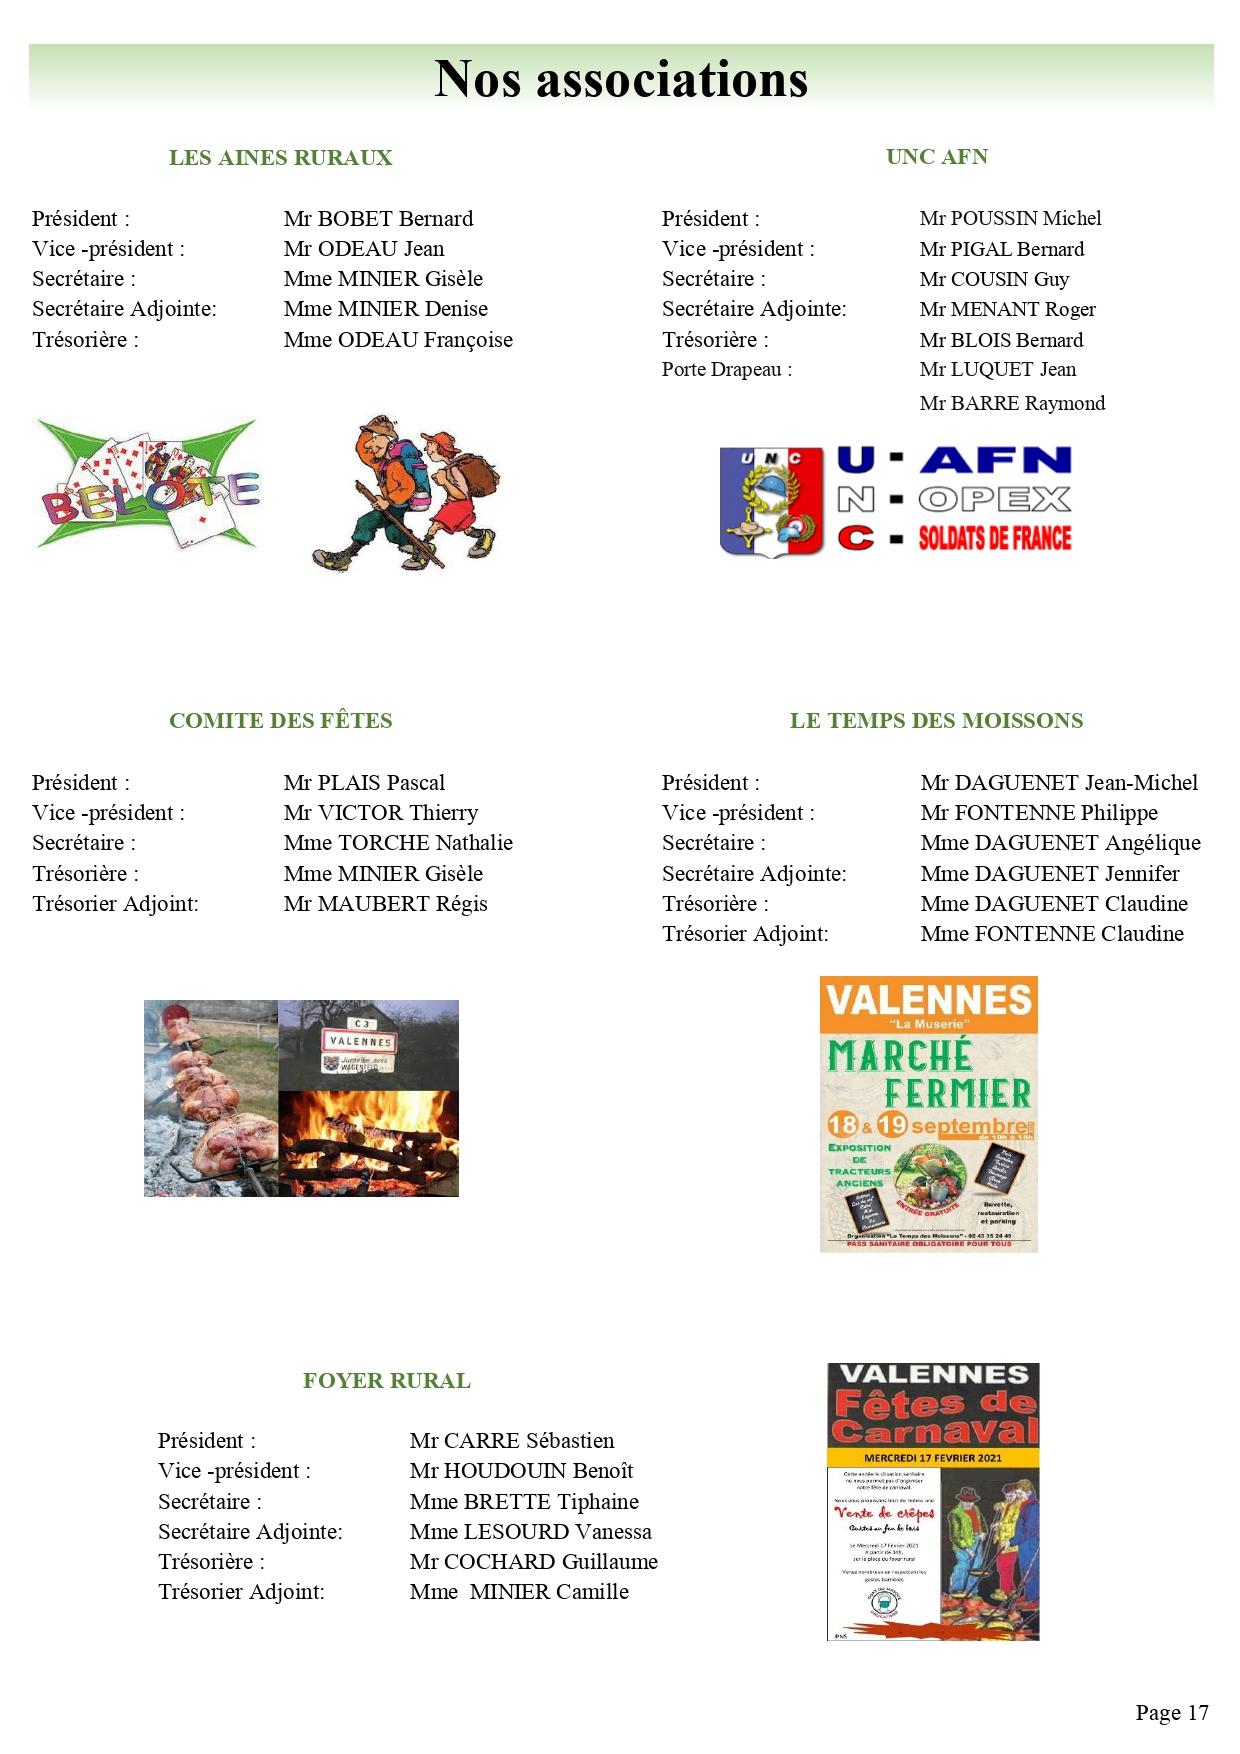 Nos associations page 0001